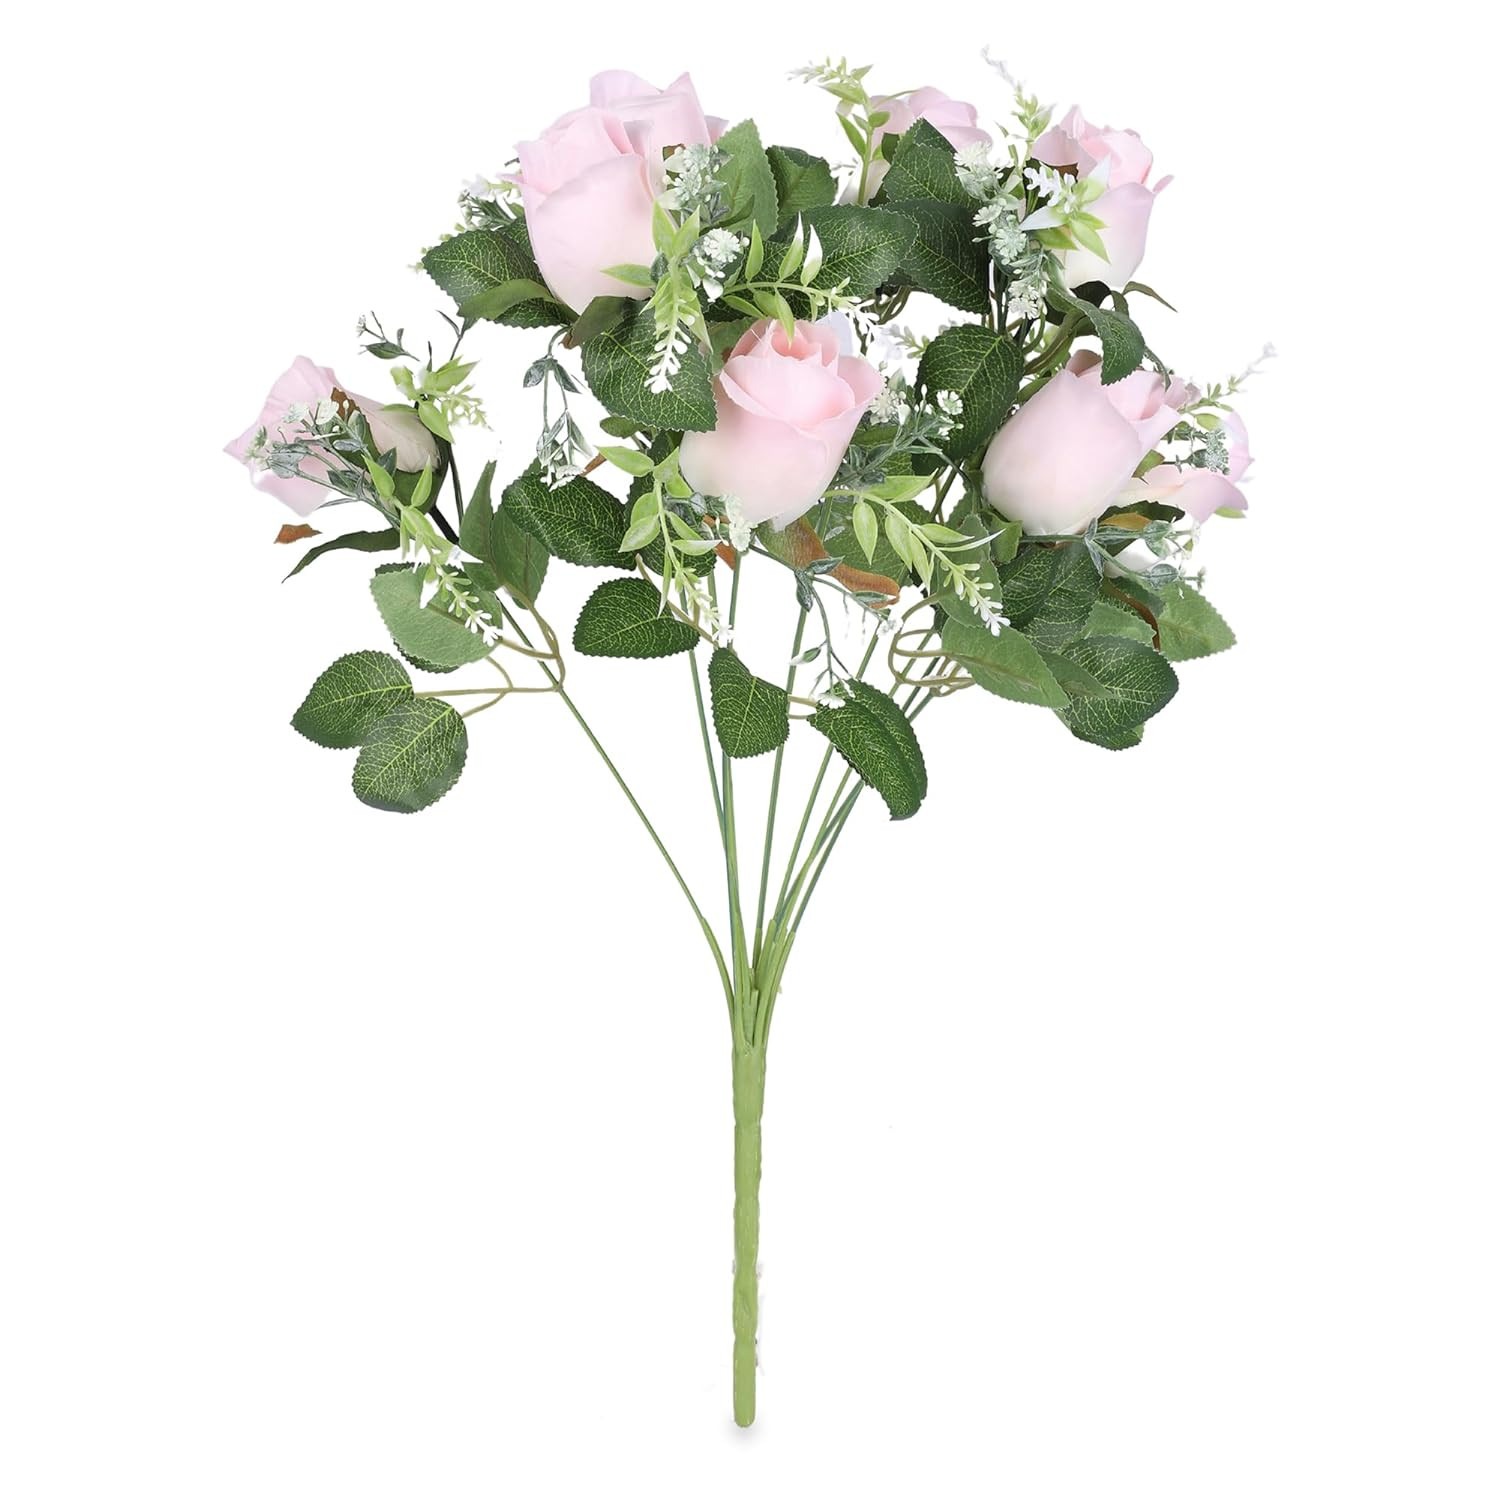 Kuber Industries Artificial Flowers for Home DÃ©cor|Natural Looking Indoor Fake Flowers for Vase|Artificial Flowers for Decoration|Without Basket (Pink)